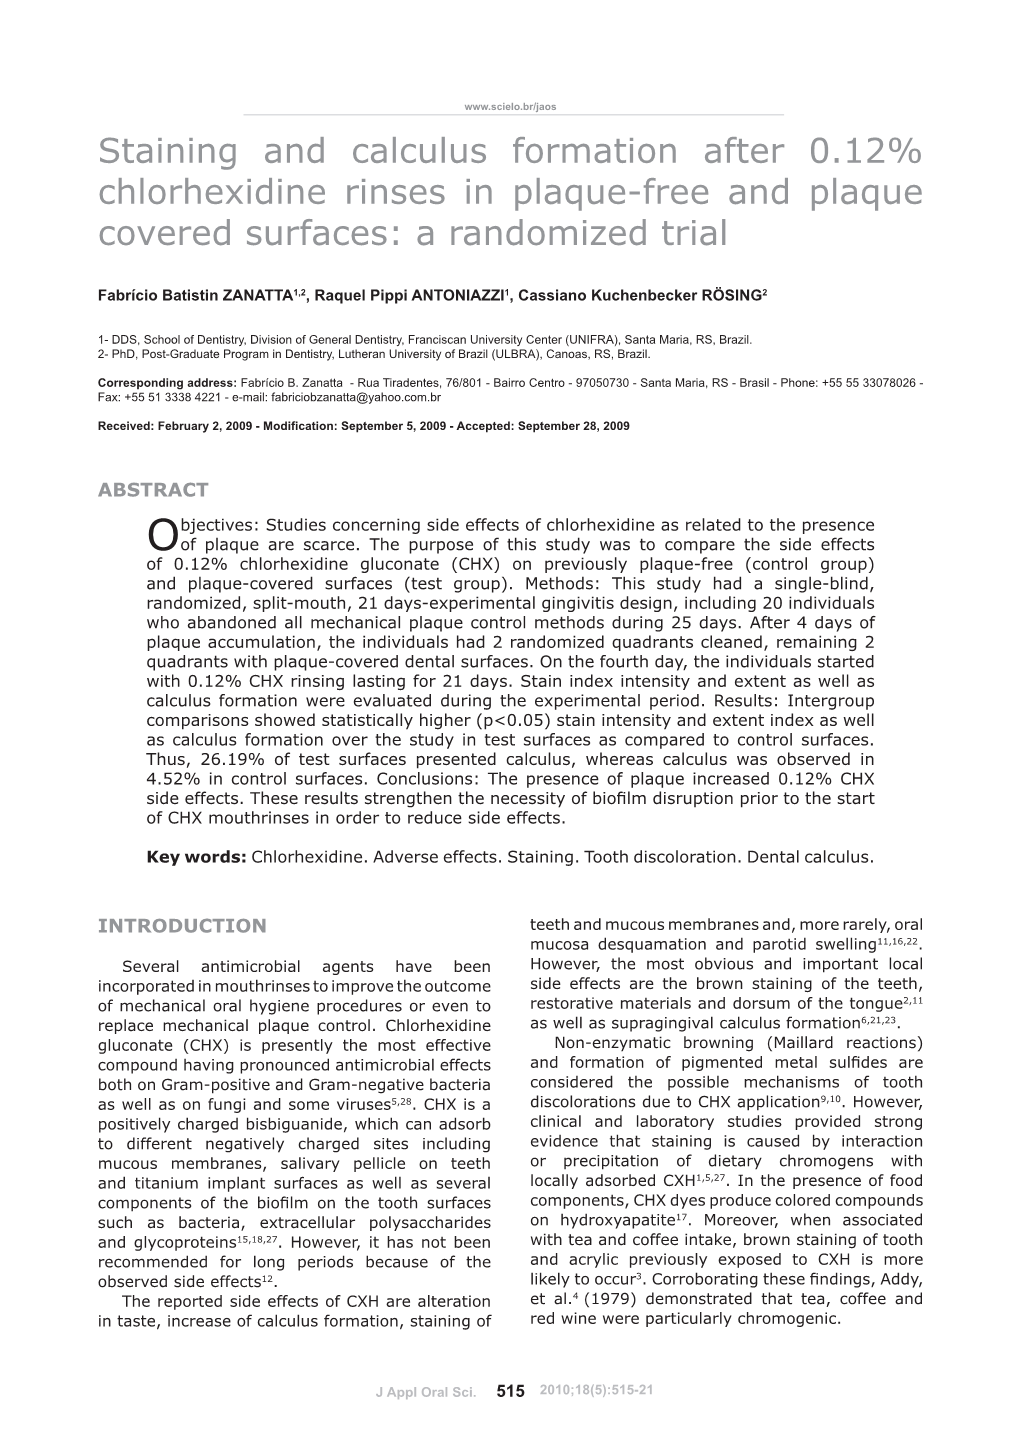 Staining and Calculus Formation After 0.12% Chlorhexidine Rinses in Plaque-Free and Plaque Covered Surfaces: a Randomized Trial